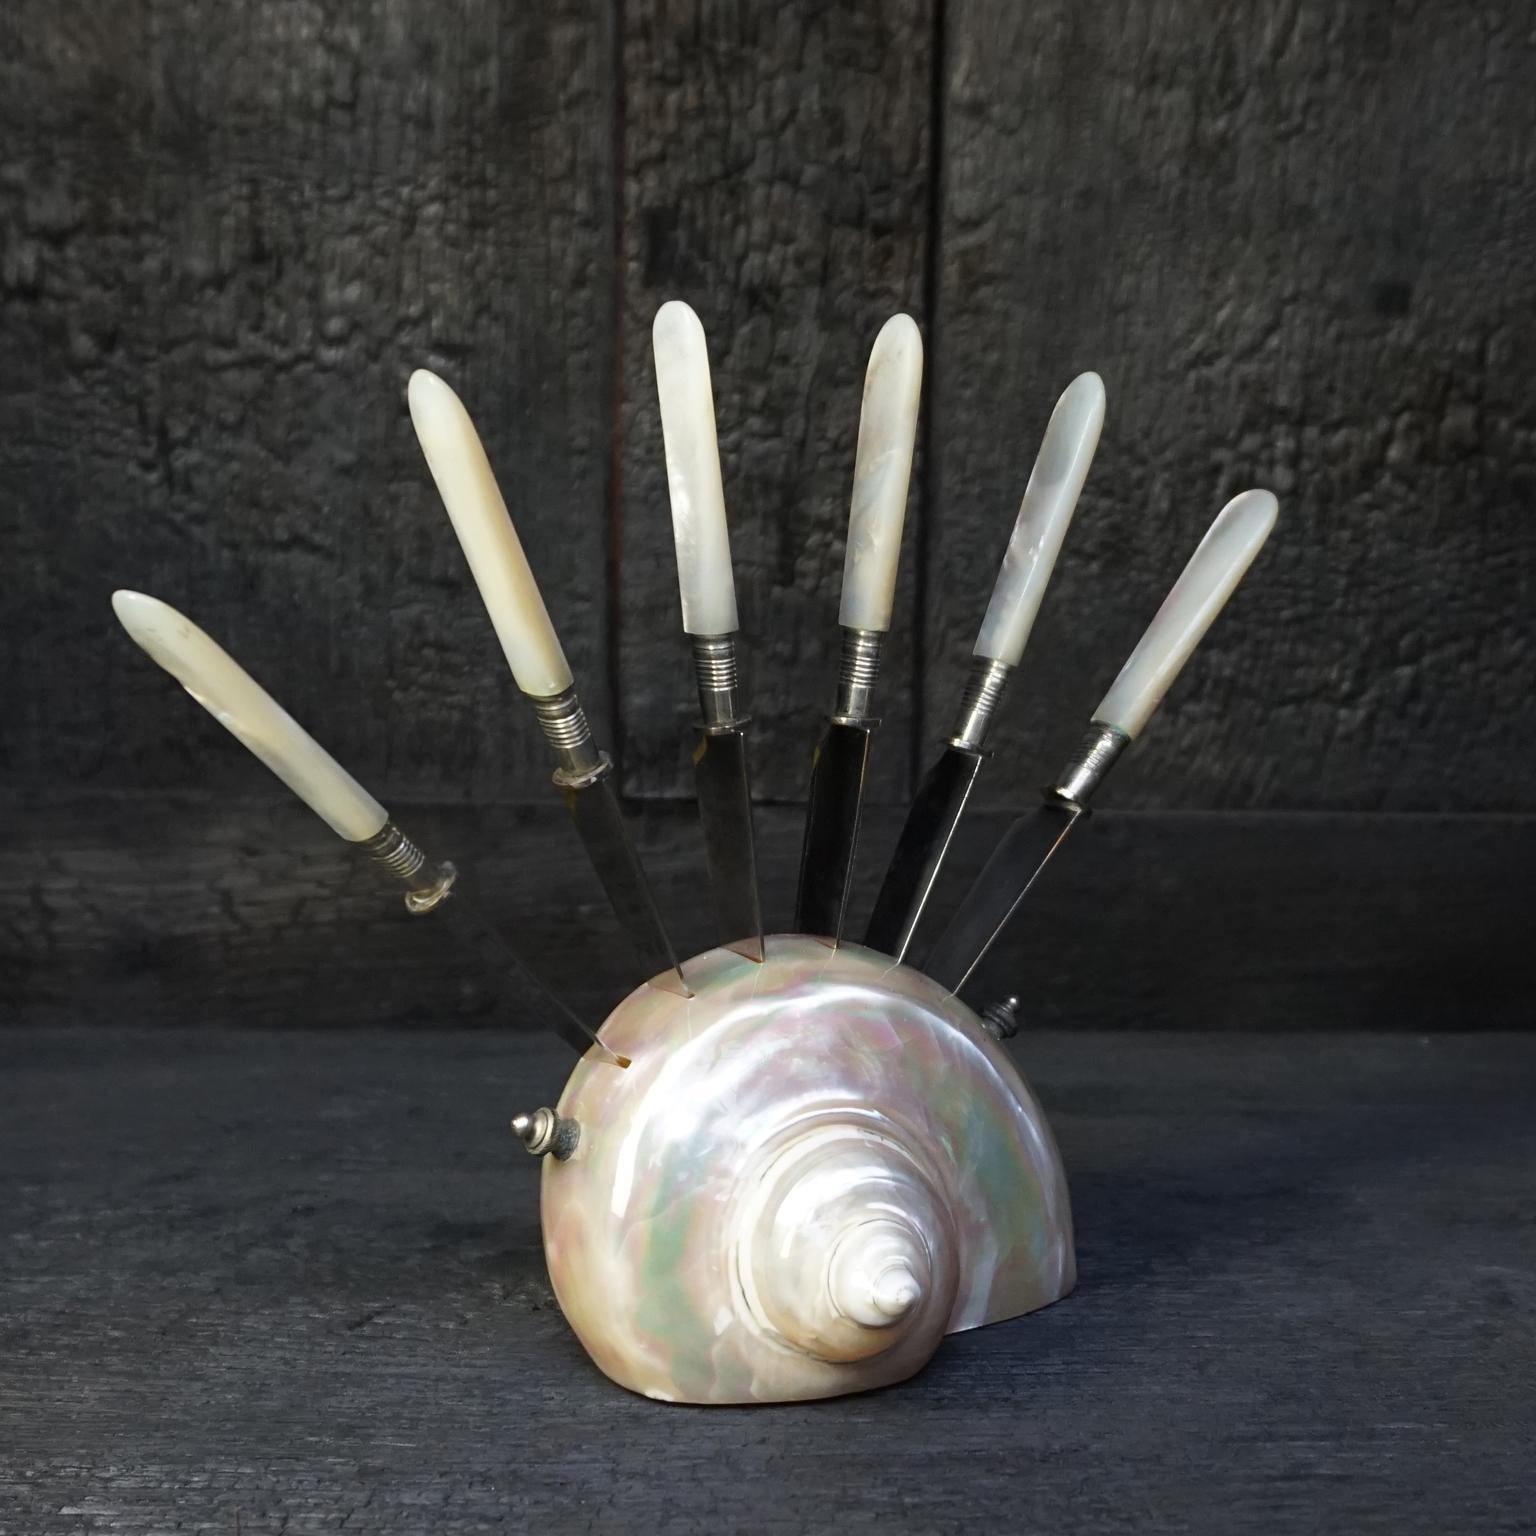 Beautiful large pearled polished turbo marmoratus shell holder with six fruit knives also with mother of pearl and silvered handles, they stay in place through an ingenious construction inside.

The metal of the knives shows some spots of very